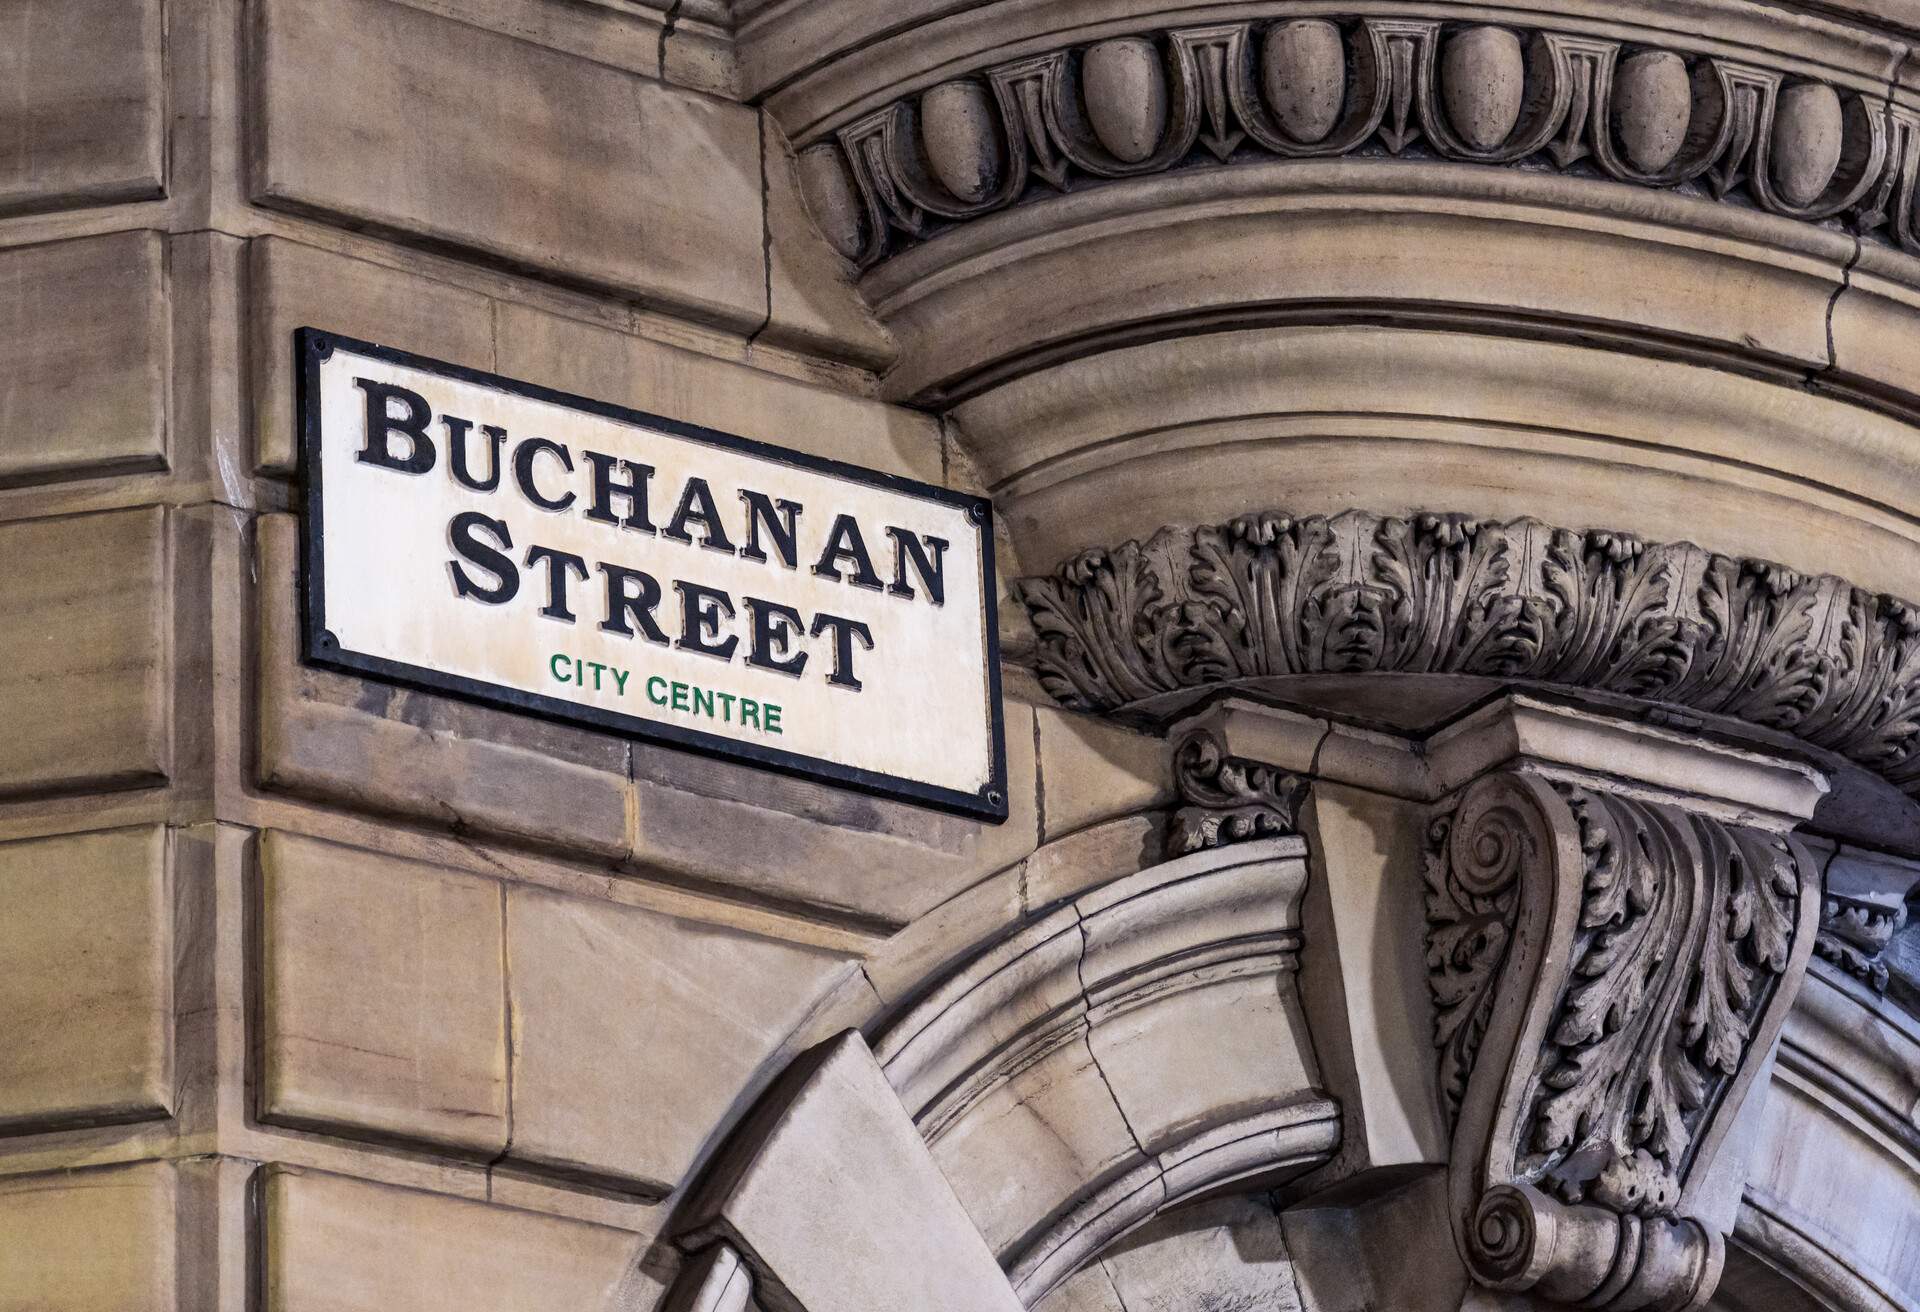 A sign for Buchanan Street in Glasgow, Scotland. The street is in the heart of the city centre, and is a well known shopping street.